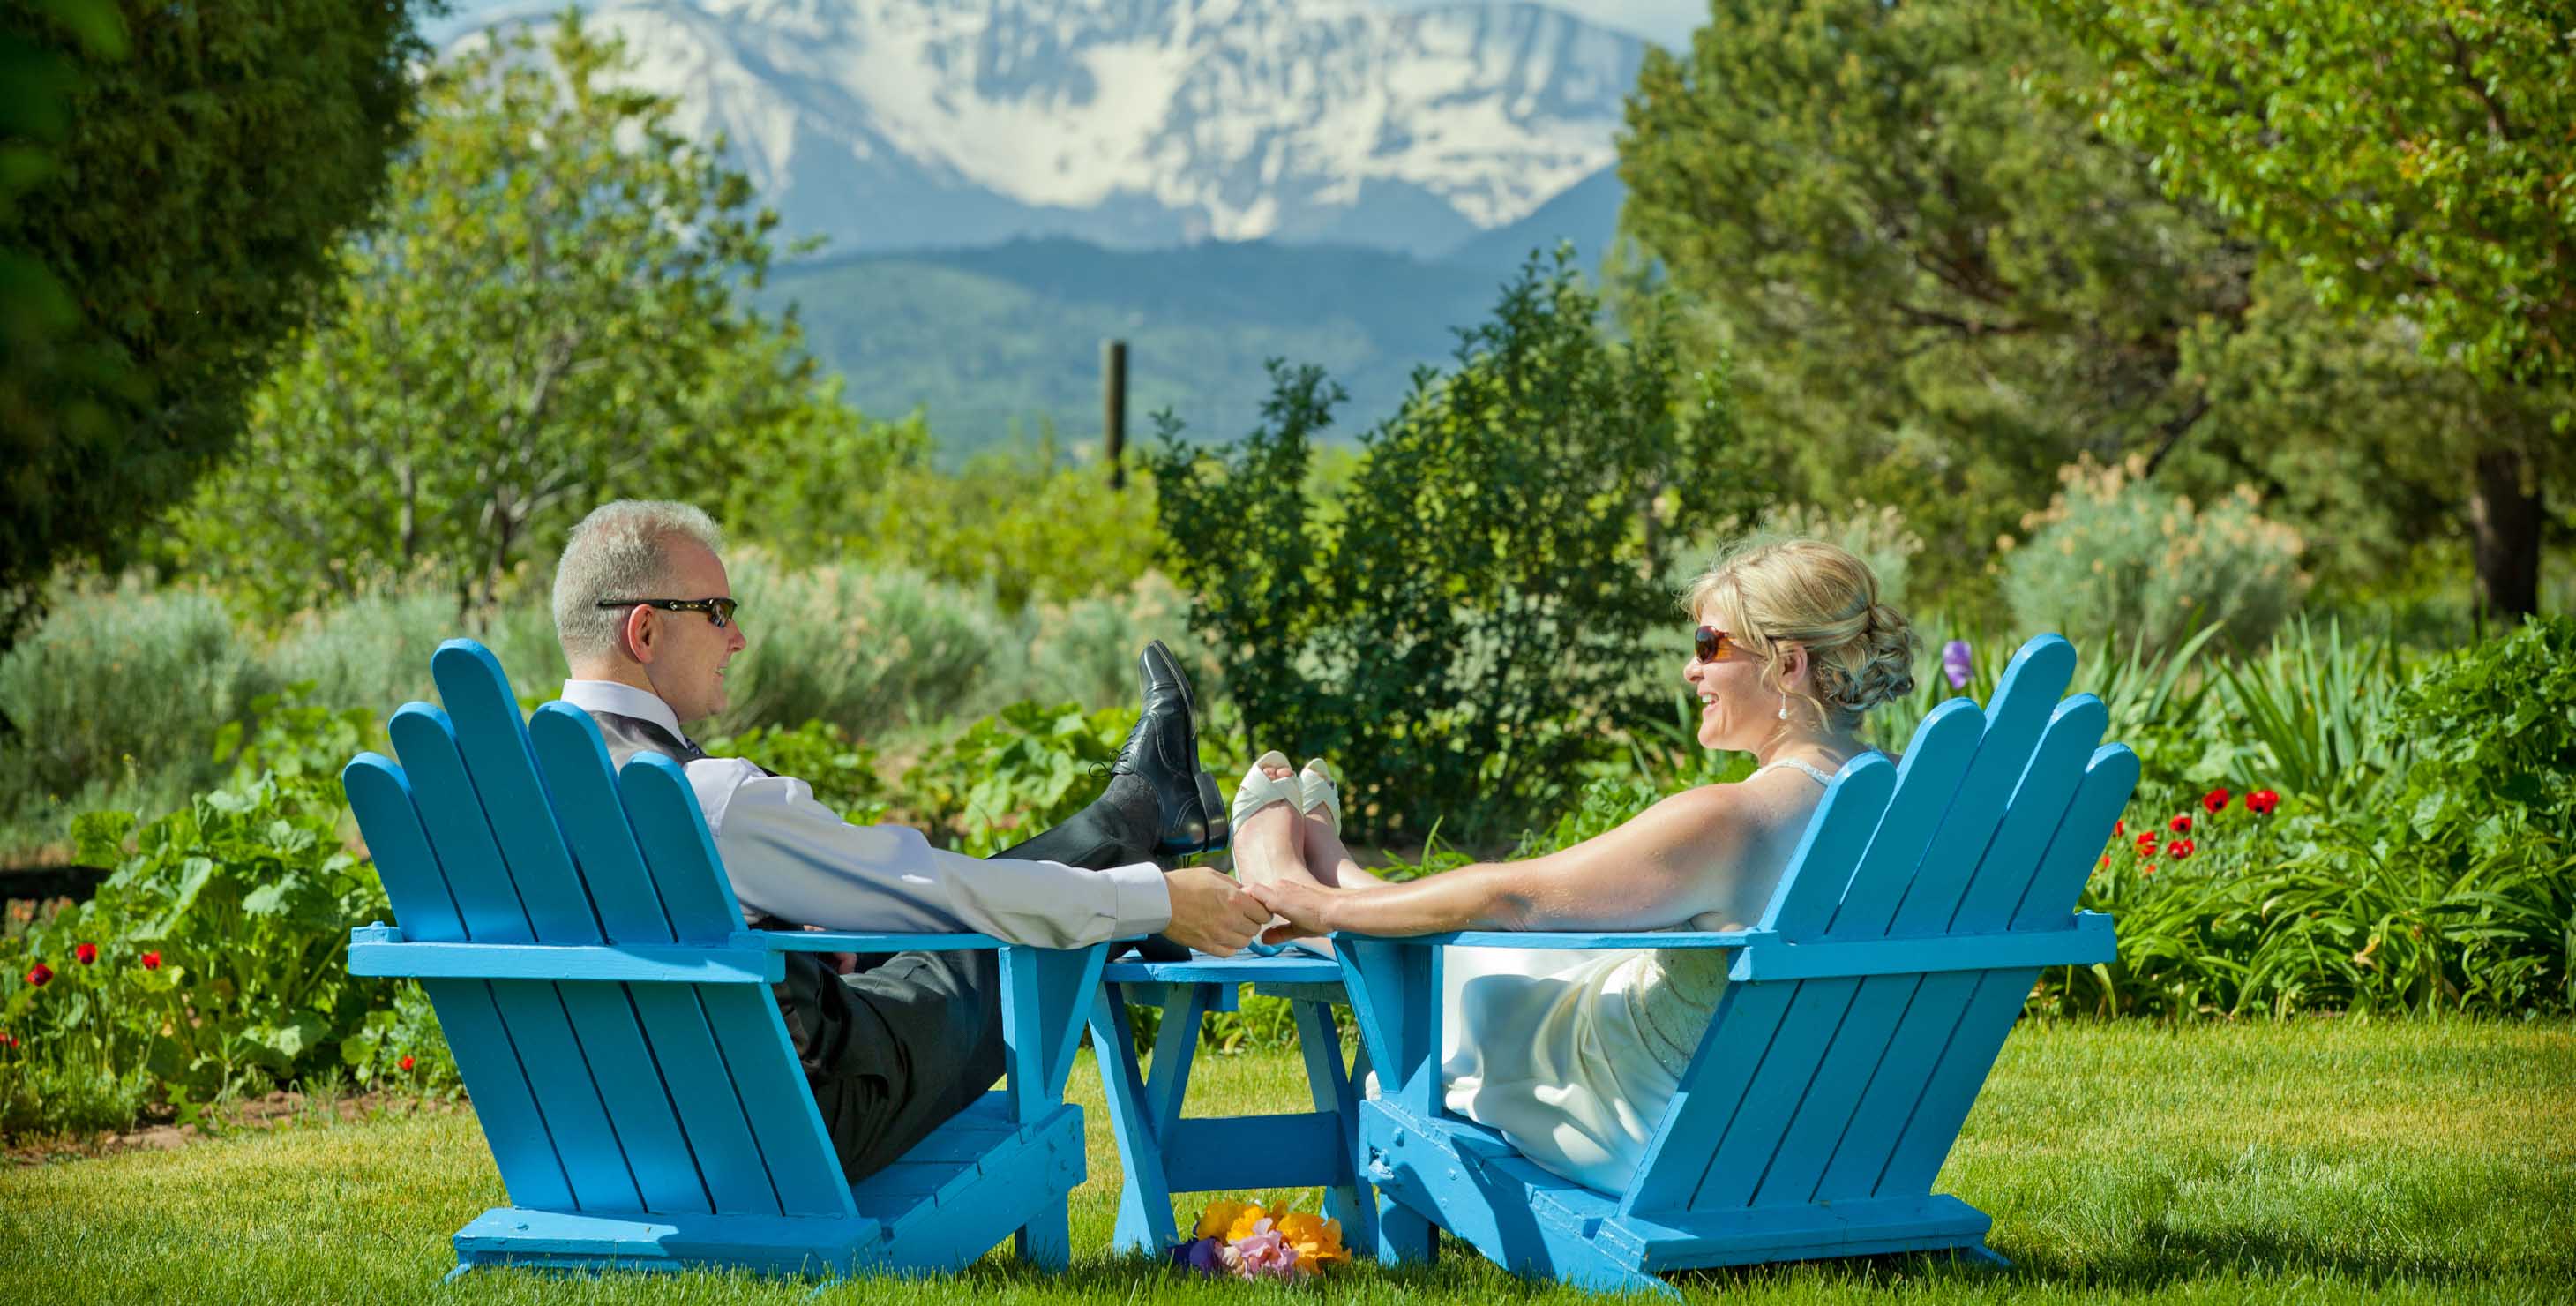 Elopement couple sitting on blue wooden chairs in a garden with mountains in the distance